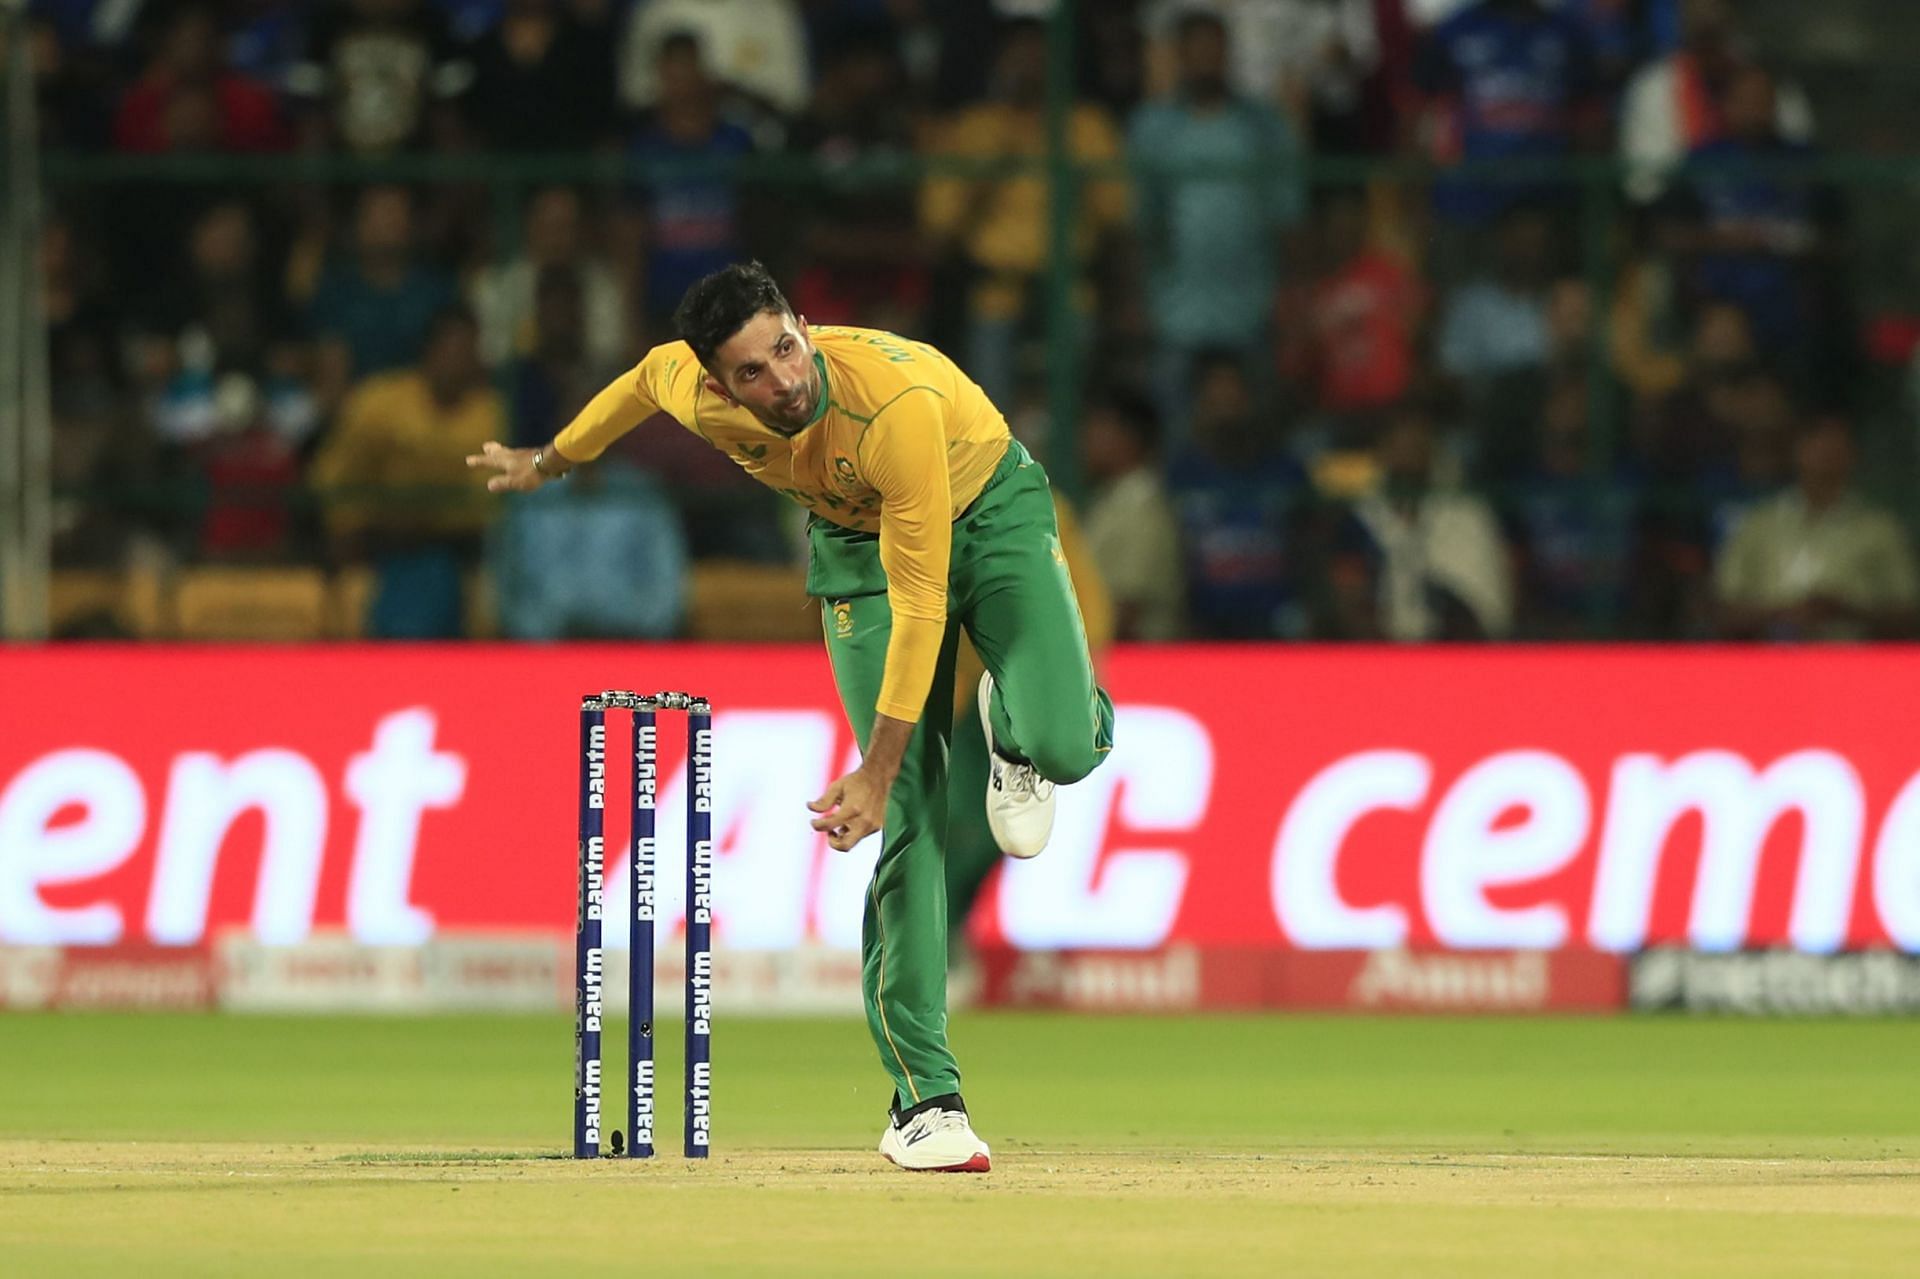 5th T20 International: India v South Africa